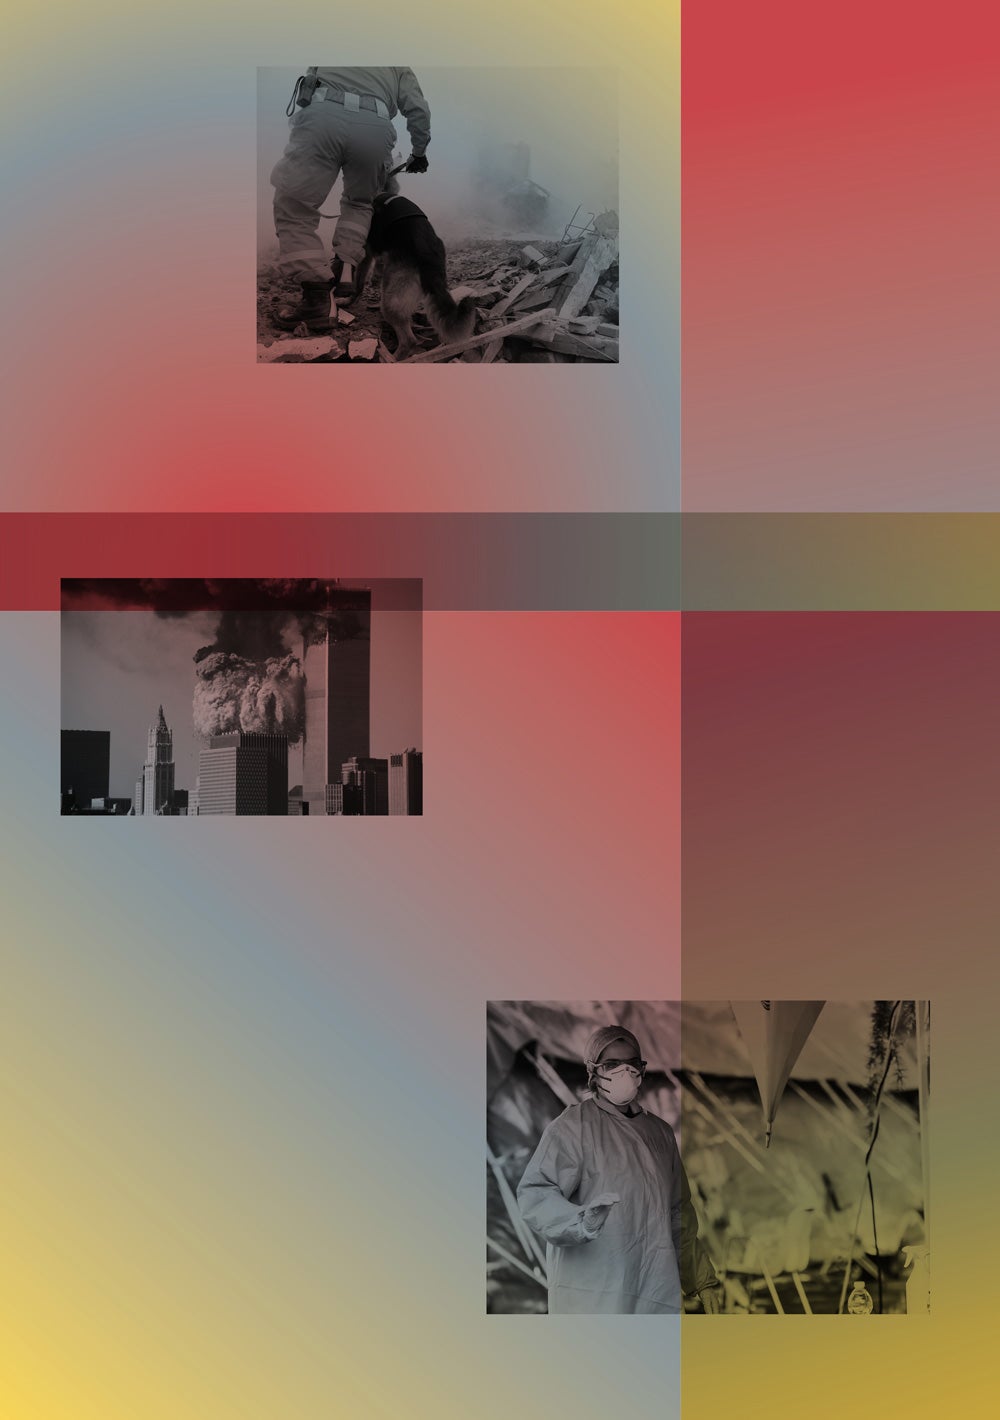 Three black and white images depicting unrest and trauma with multiple gradient boxes overlaid. Gradient goes from deep red to grey to bright yellow. Top image shows a rescue worker and dog walking over rubble, the second image shows the Twin Towers on fire on 9/11, the final image shows a healthcare worker outside a medical tent with scrubs, gloves, surgical hat and mask on.